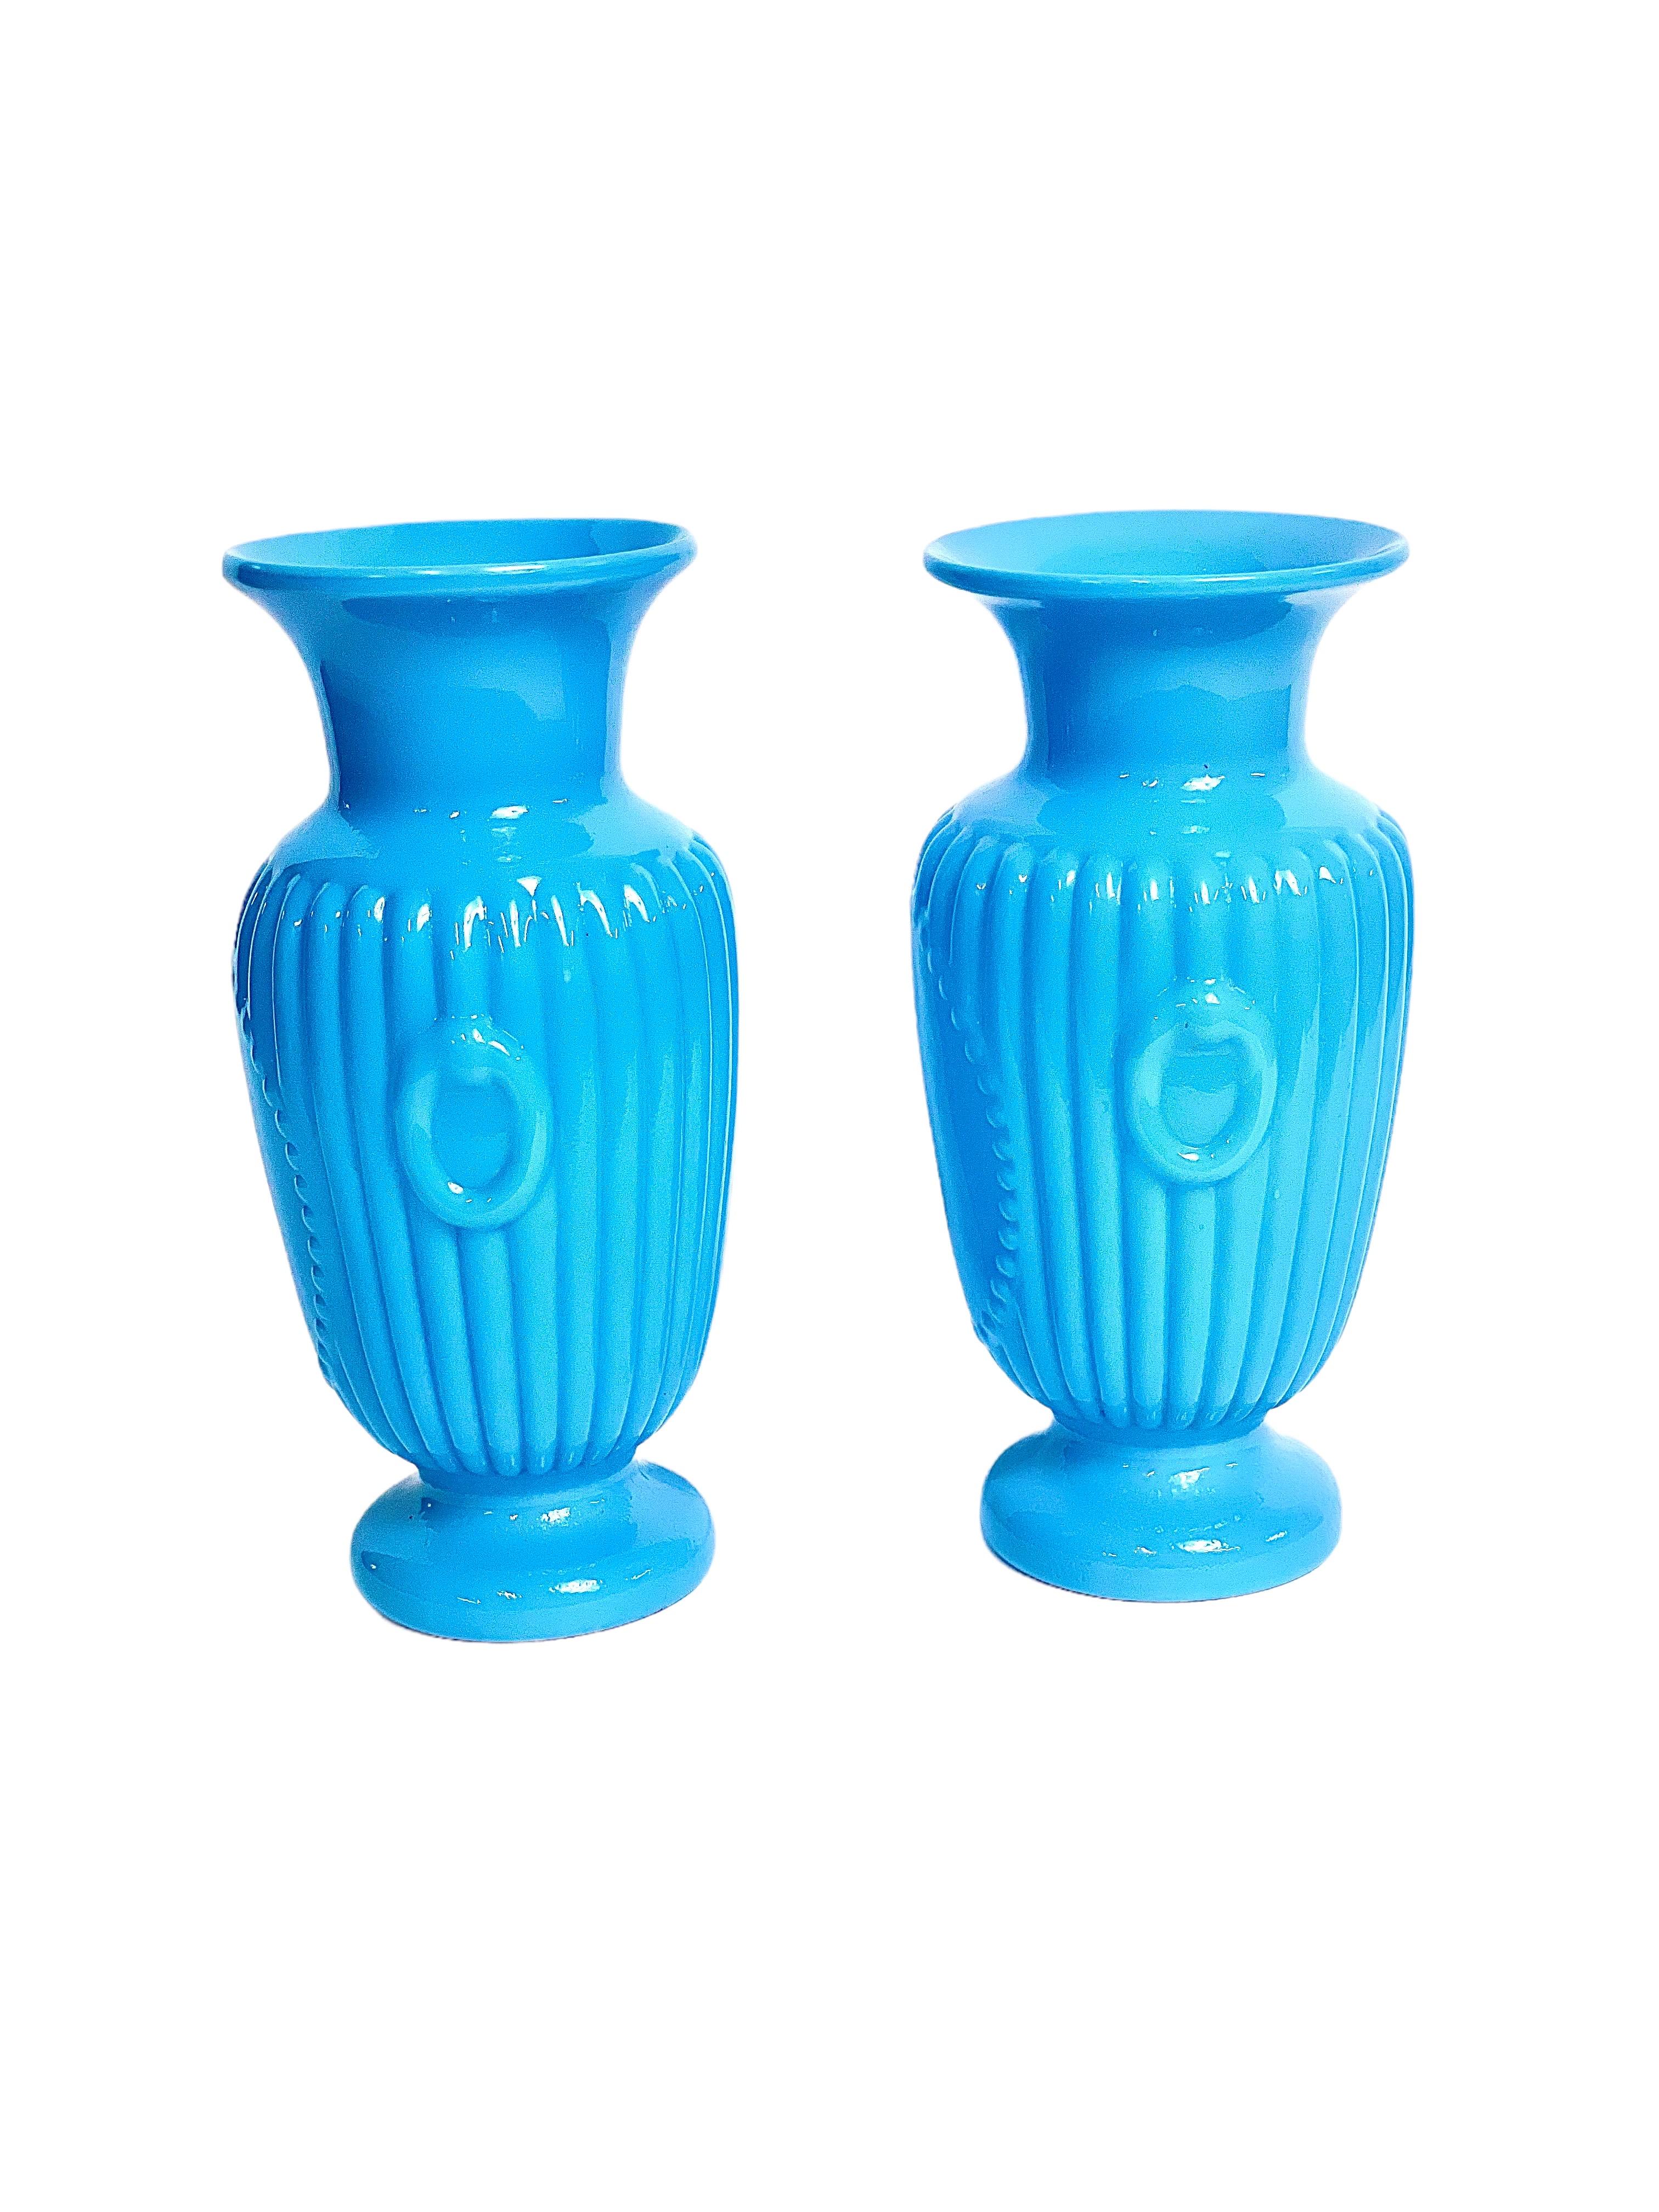 These striking ornate vases, crafted in vibrant turquoise blue opaline and believed to date back to approximately 1870 during the Napoléon III era, exude timeless elegance. Although unmarked, these vases beautifully embody the distinctive style and